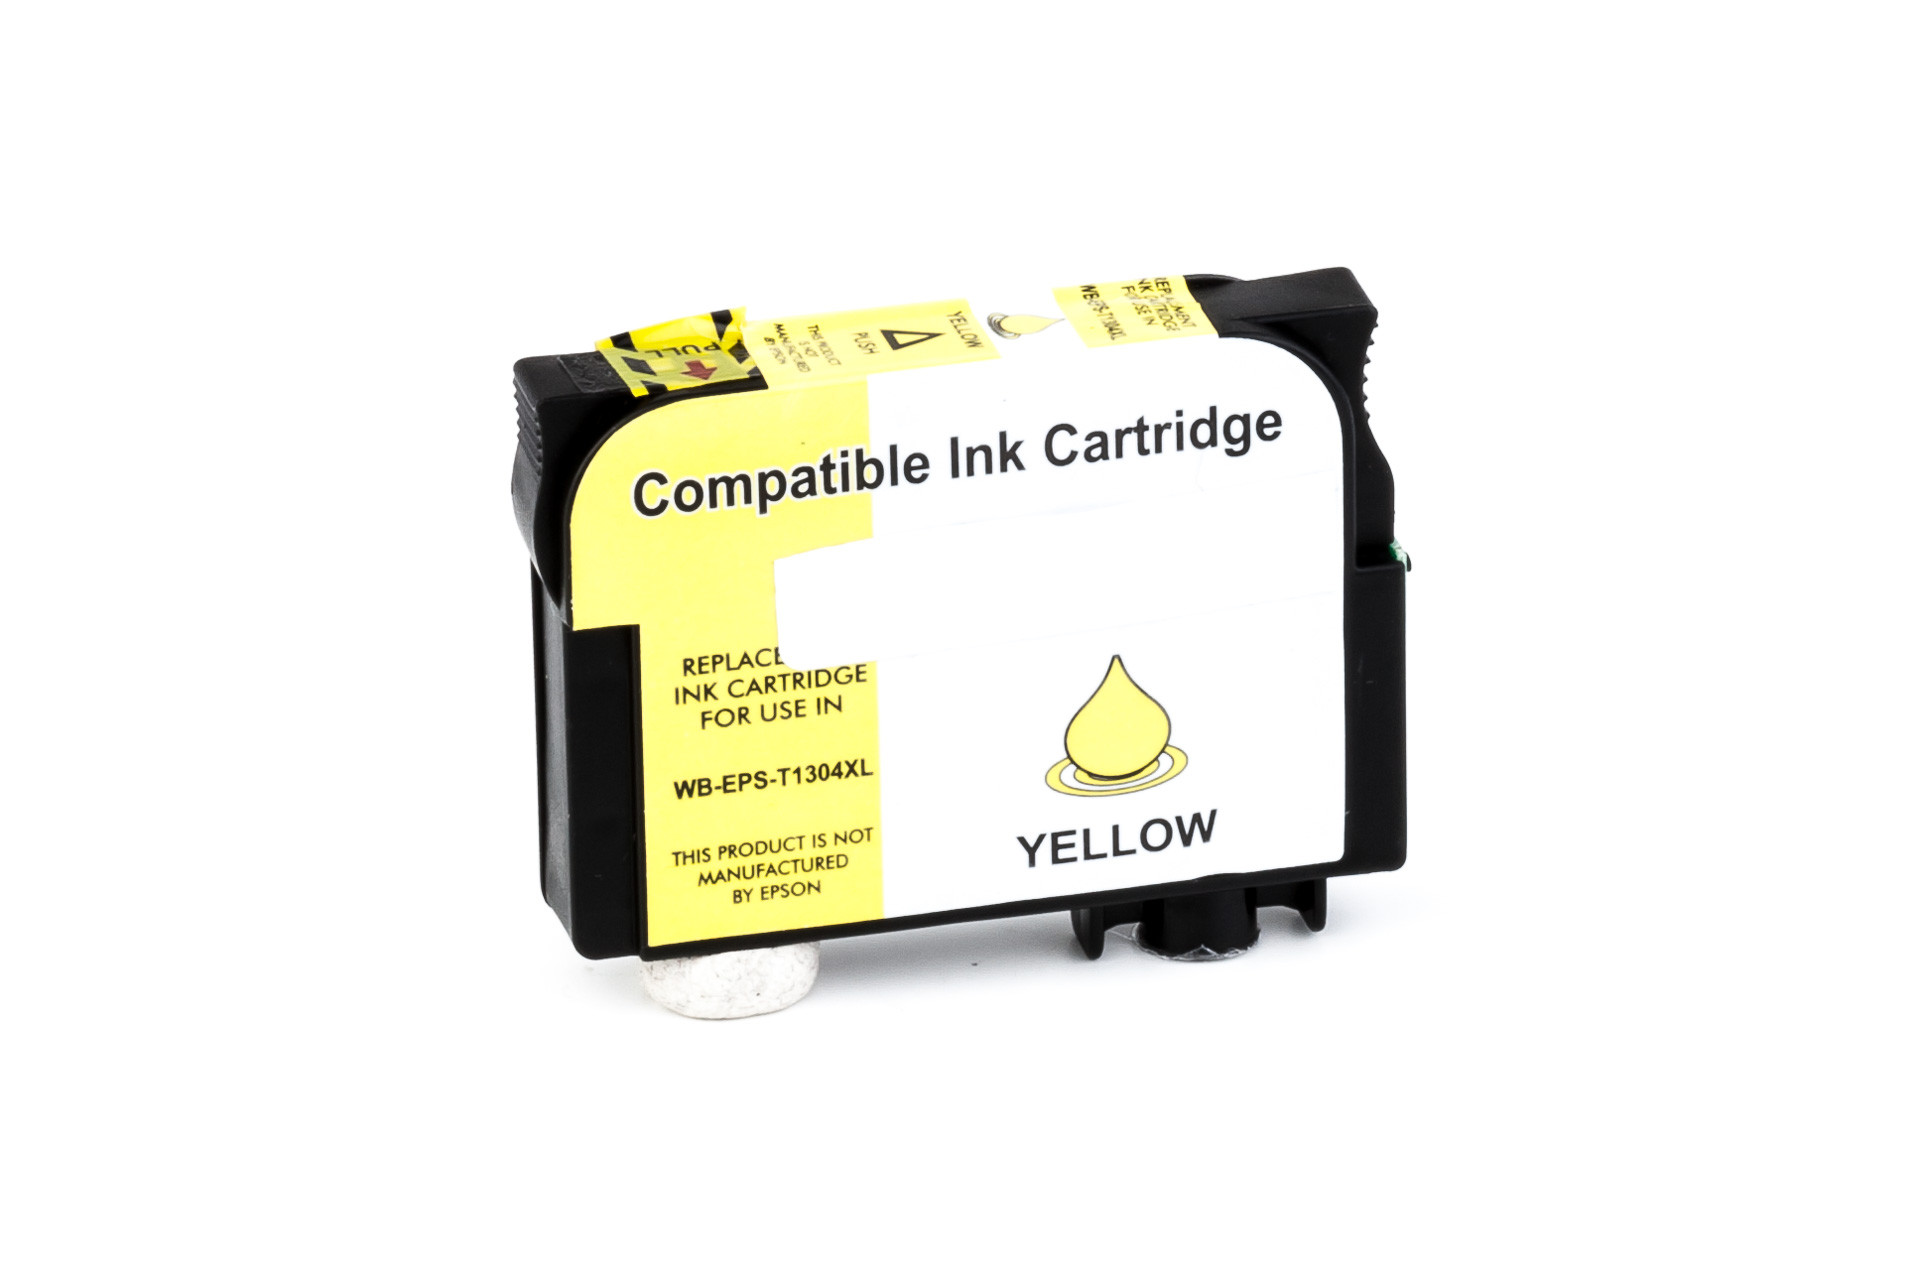 Ink cartridge (alternative) compatible with Epson - T130440 - Stylus Office B 42 WD / BX 525 WD / 535 WD / 625 FWD / 630 FWD / 635 FWD / 925 FWD / 935 FWD / Stylus SX 525 WD / 535 WD / 620 FW ff. yellow